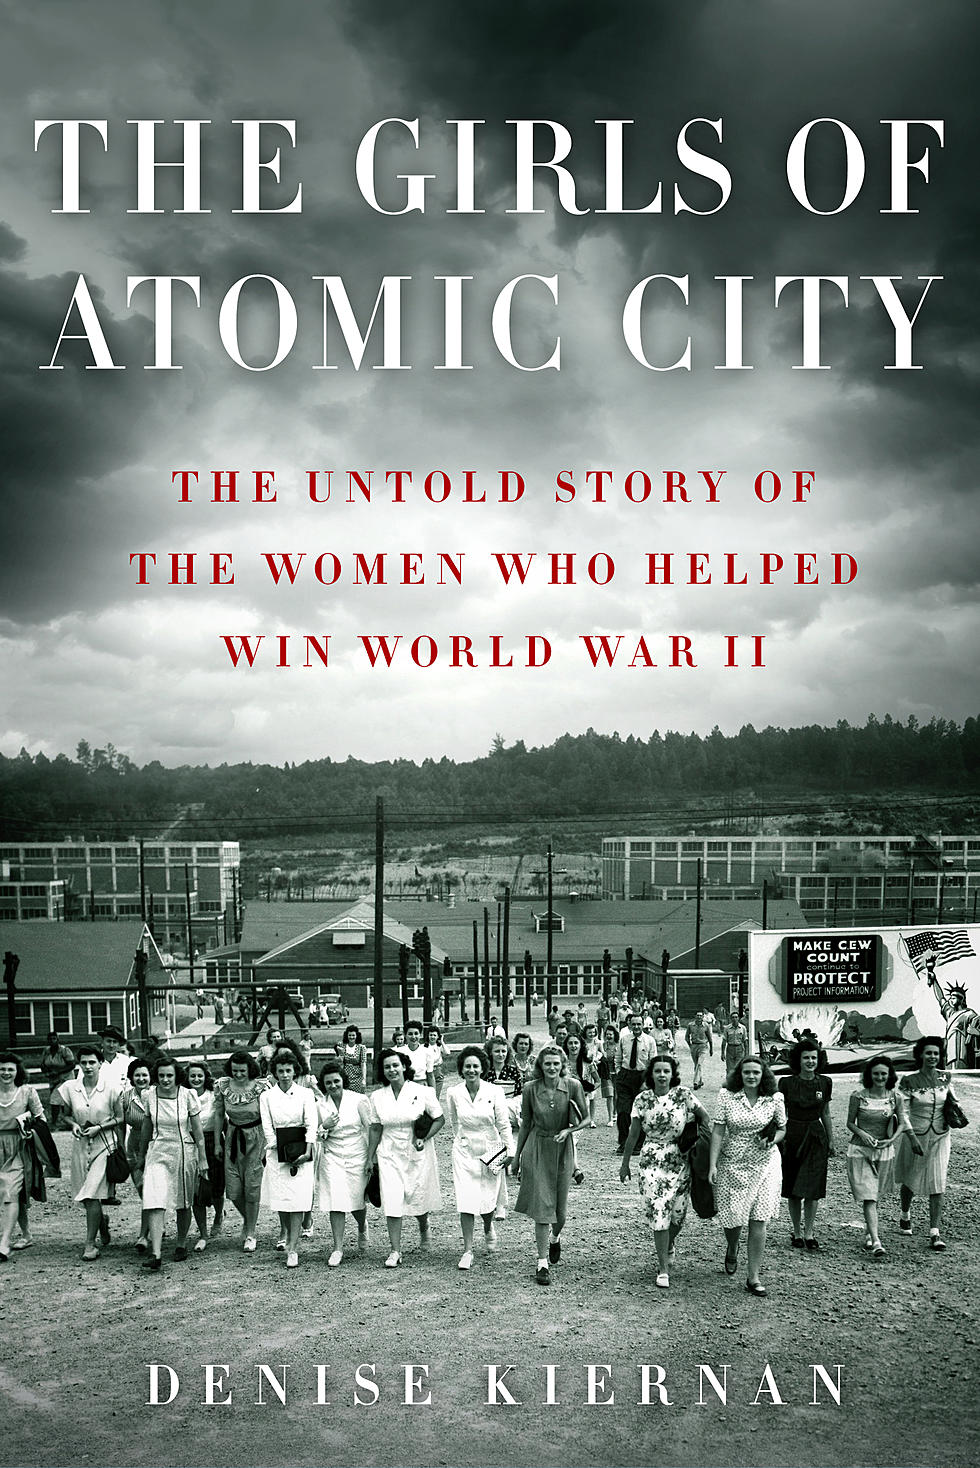 A Big Chuck Book Review: “The Girls of Atomic City”